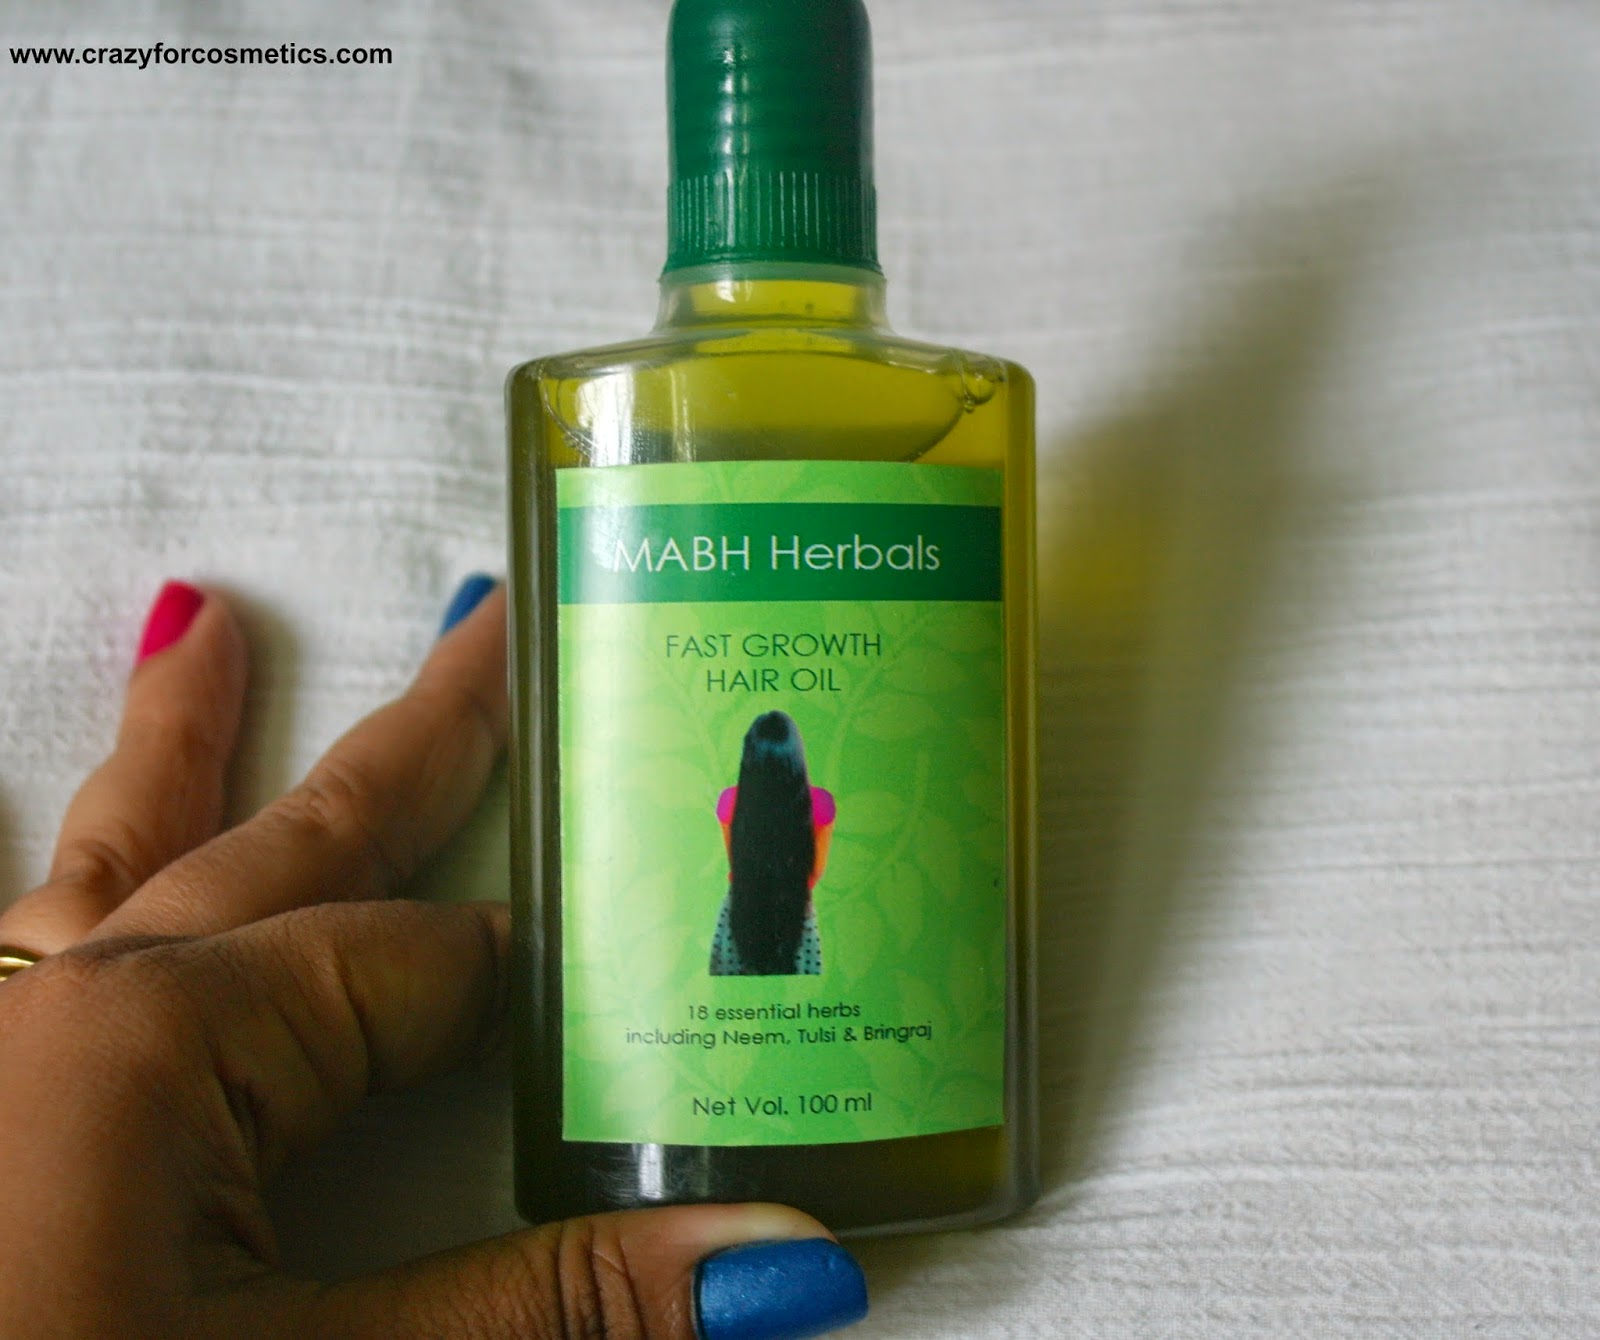 MABH fast growth hair oil review